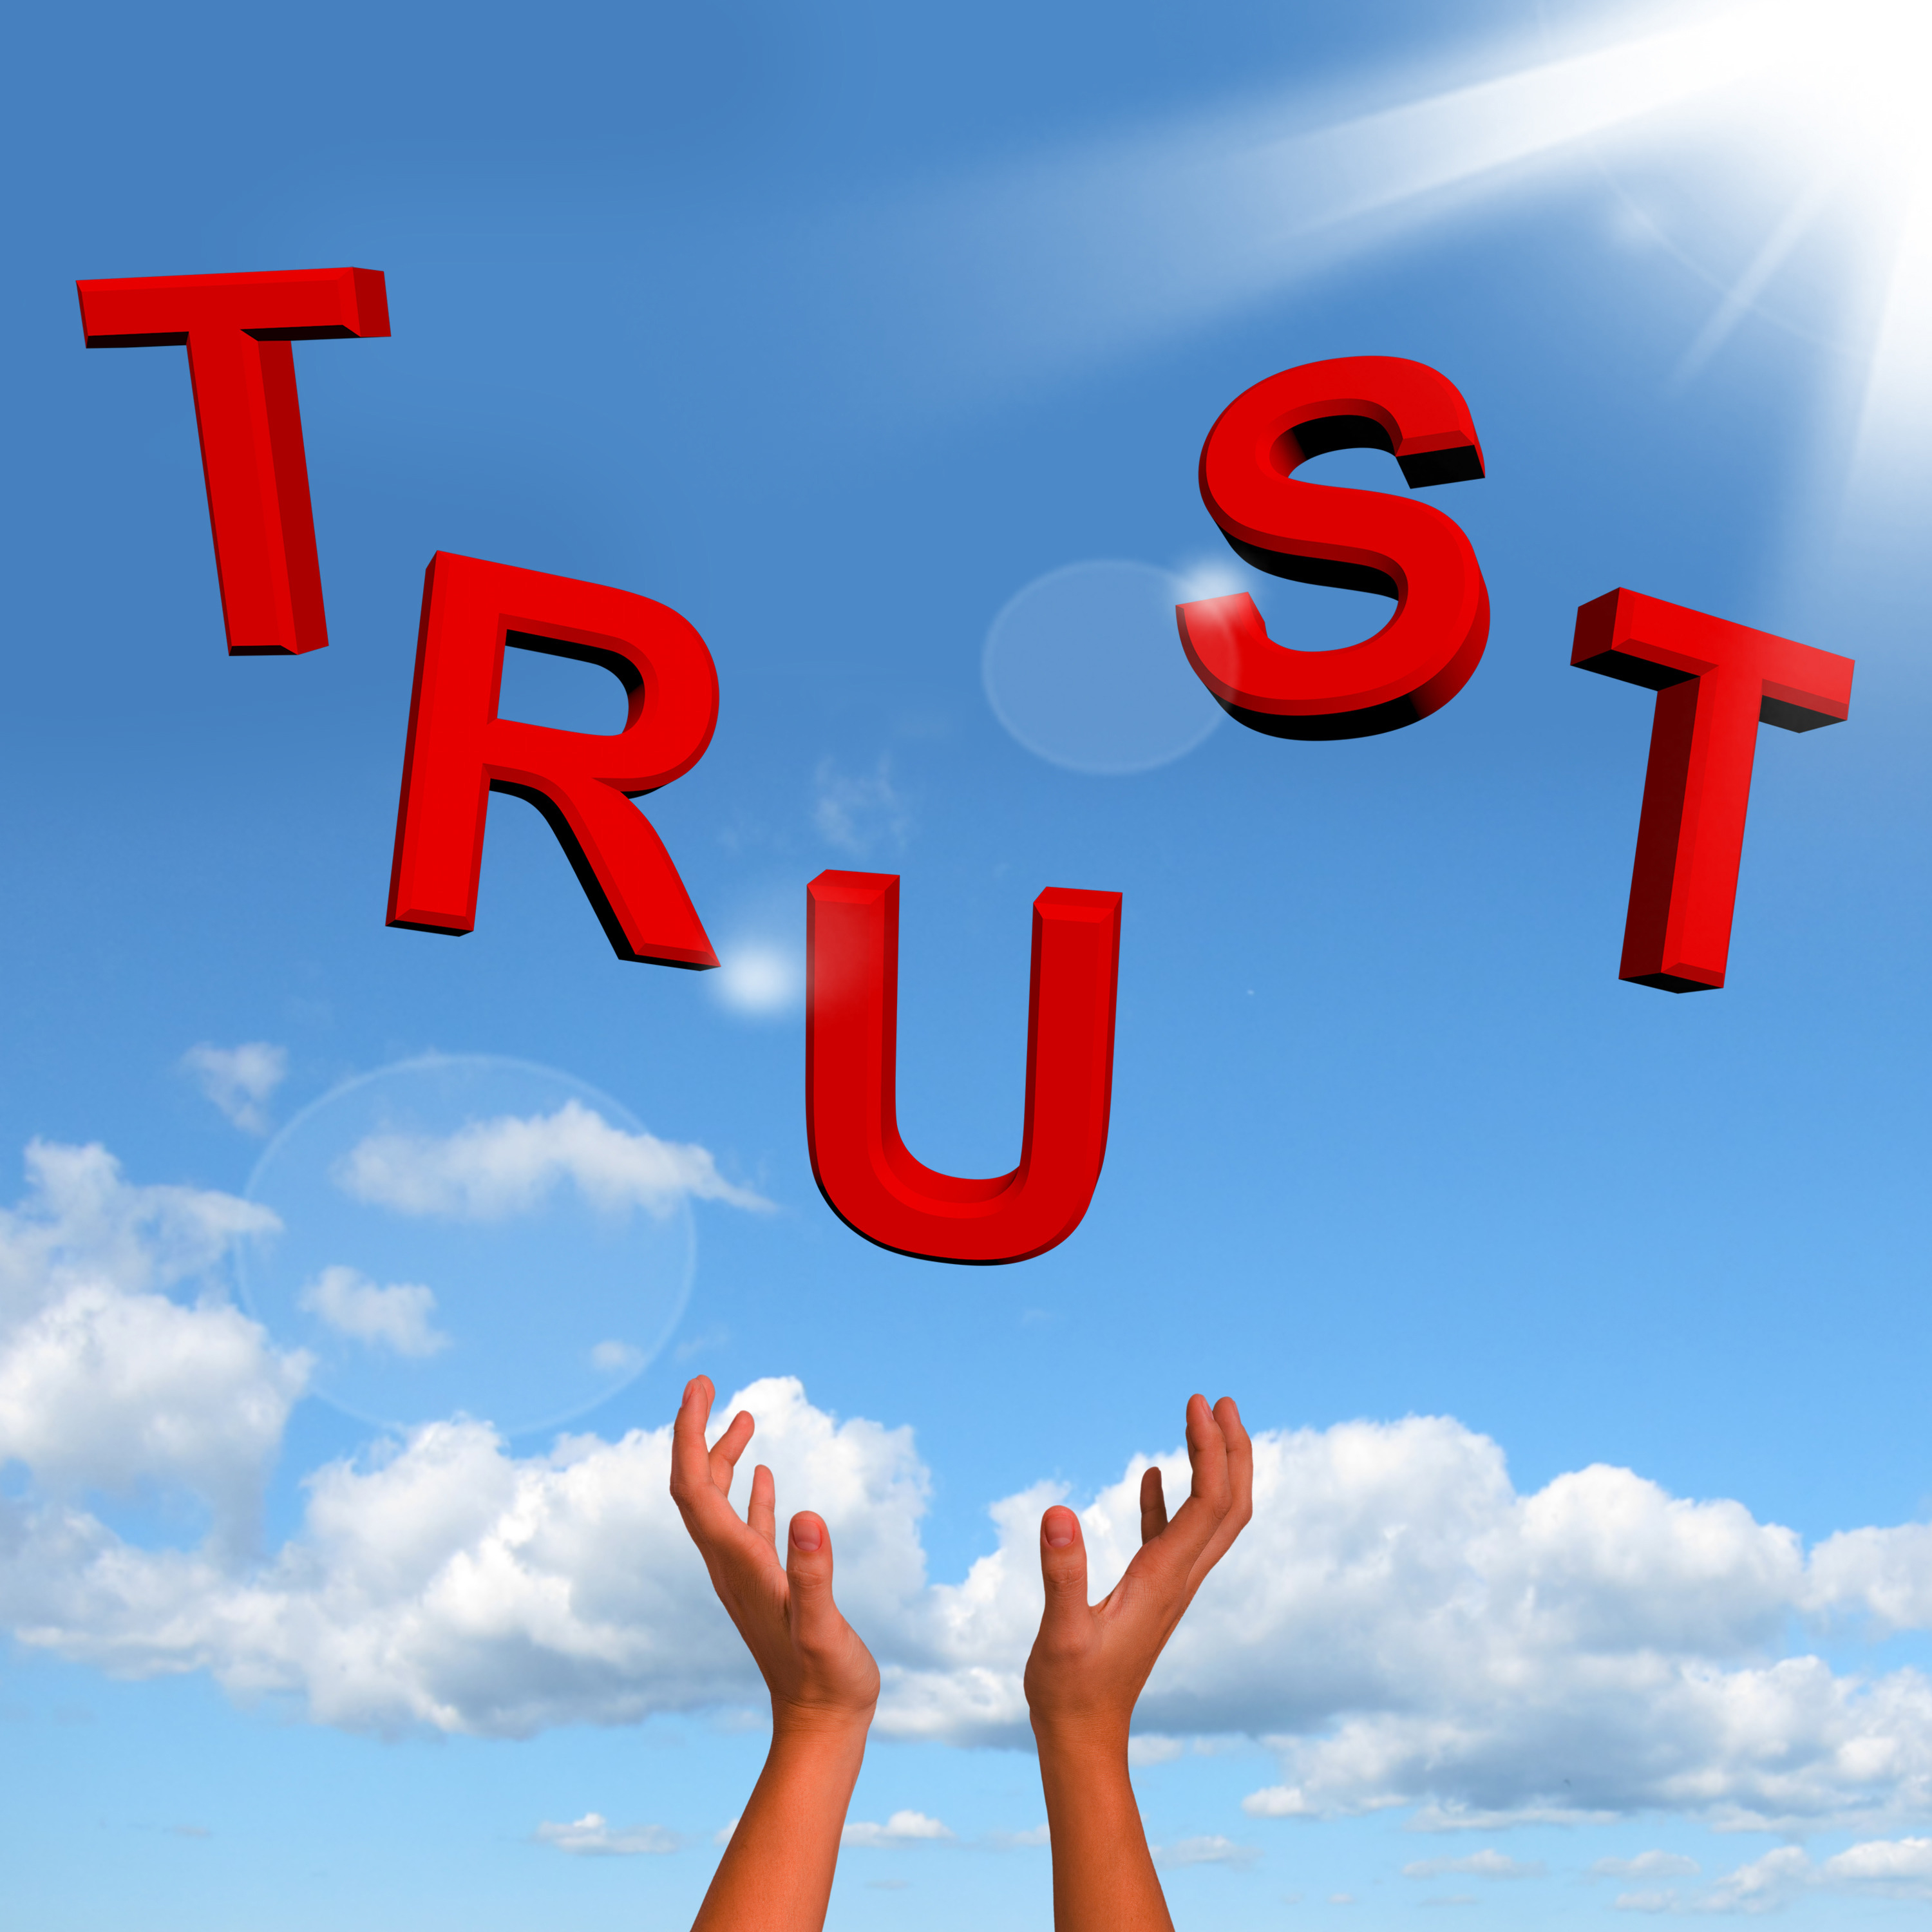 Cover image for  article: The Trust Crisis